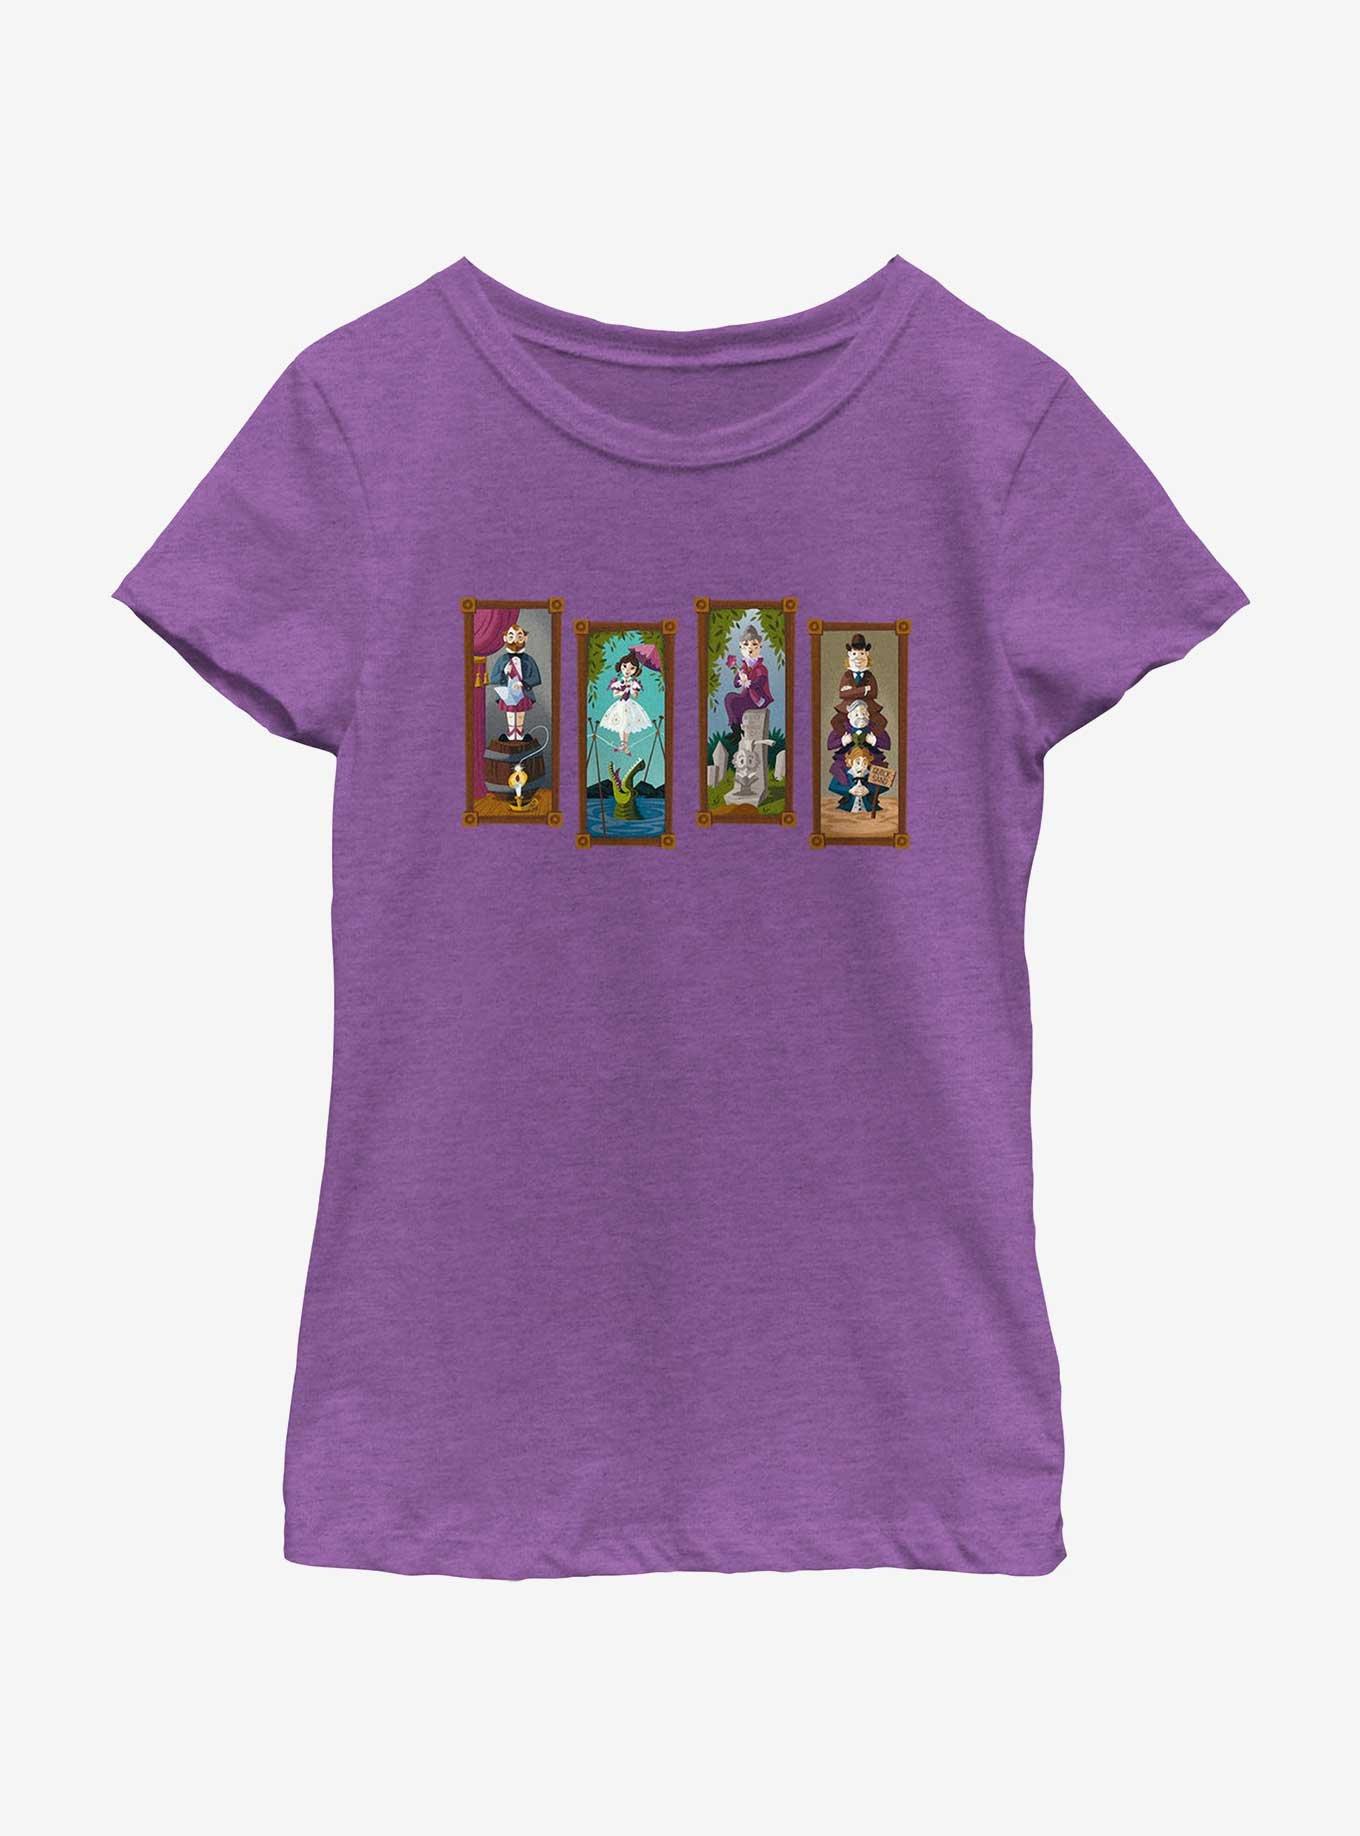 Disney The Haunted Mansion Characters Stretching Portraits Youth Girls T-Shirt, PURPLE BERRY, hi-res